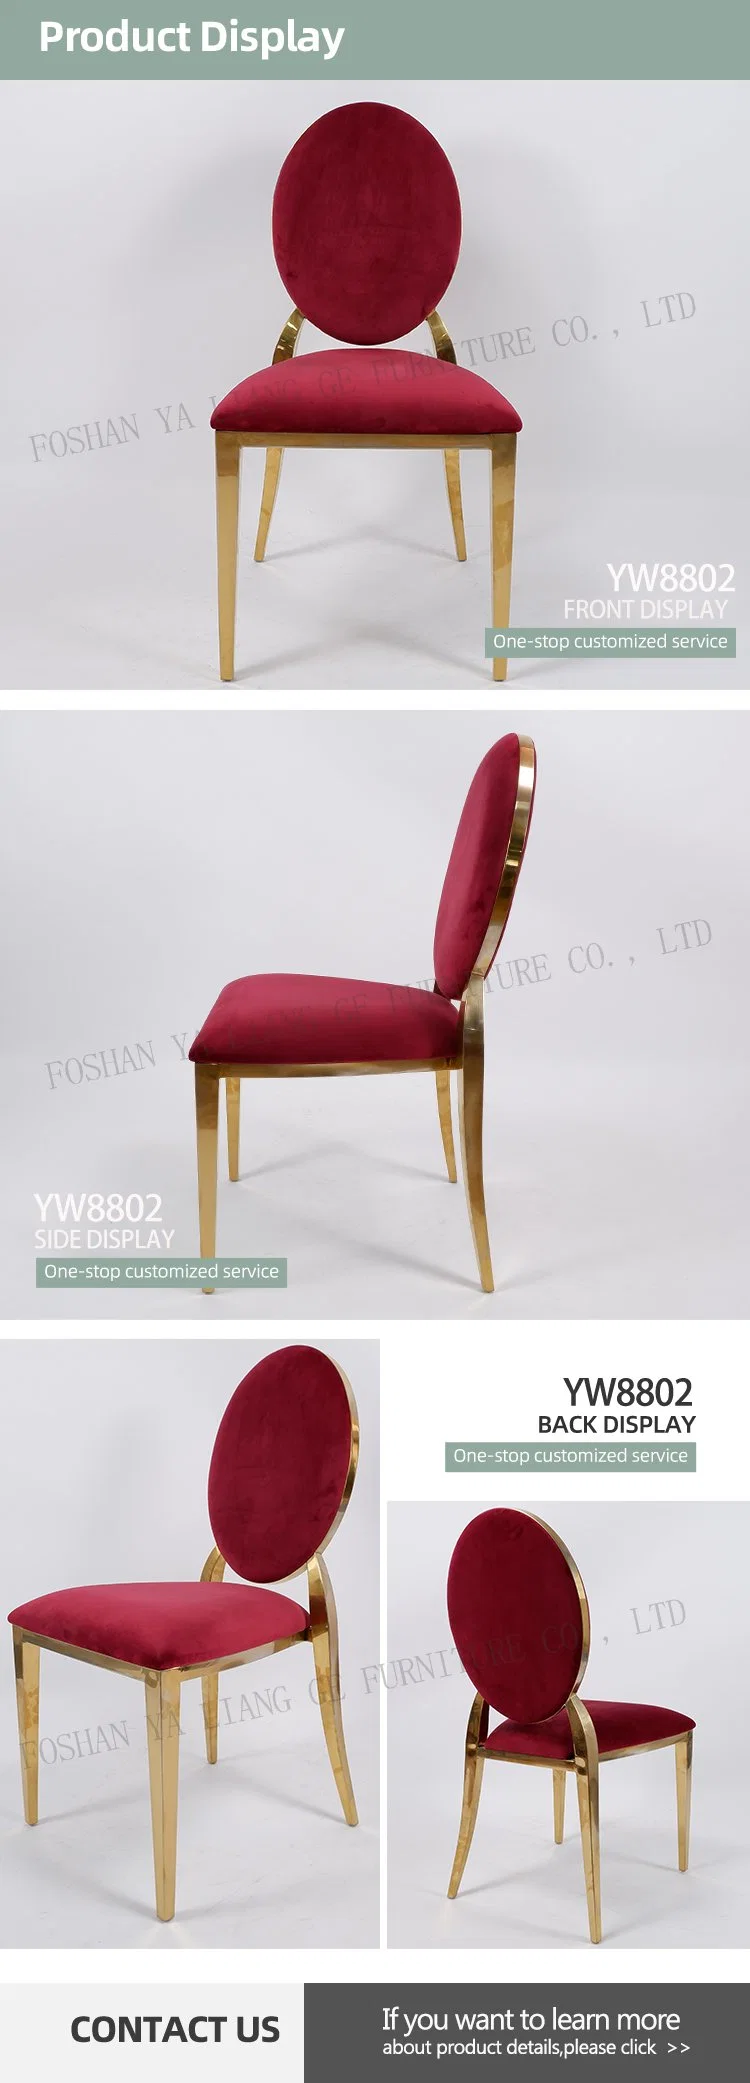 Hotel Restaurant Golden Stainless Steel Banquet Stacking Chair Soft Velvet Cushion Dining Chair for Wedding Events